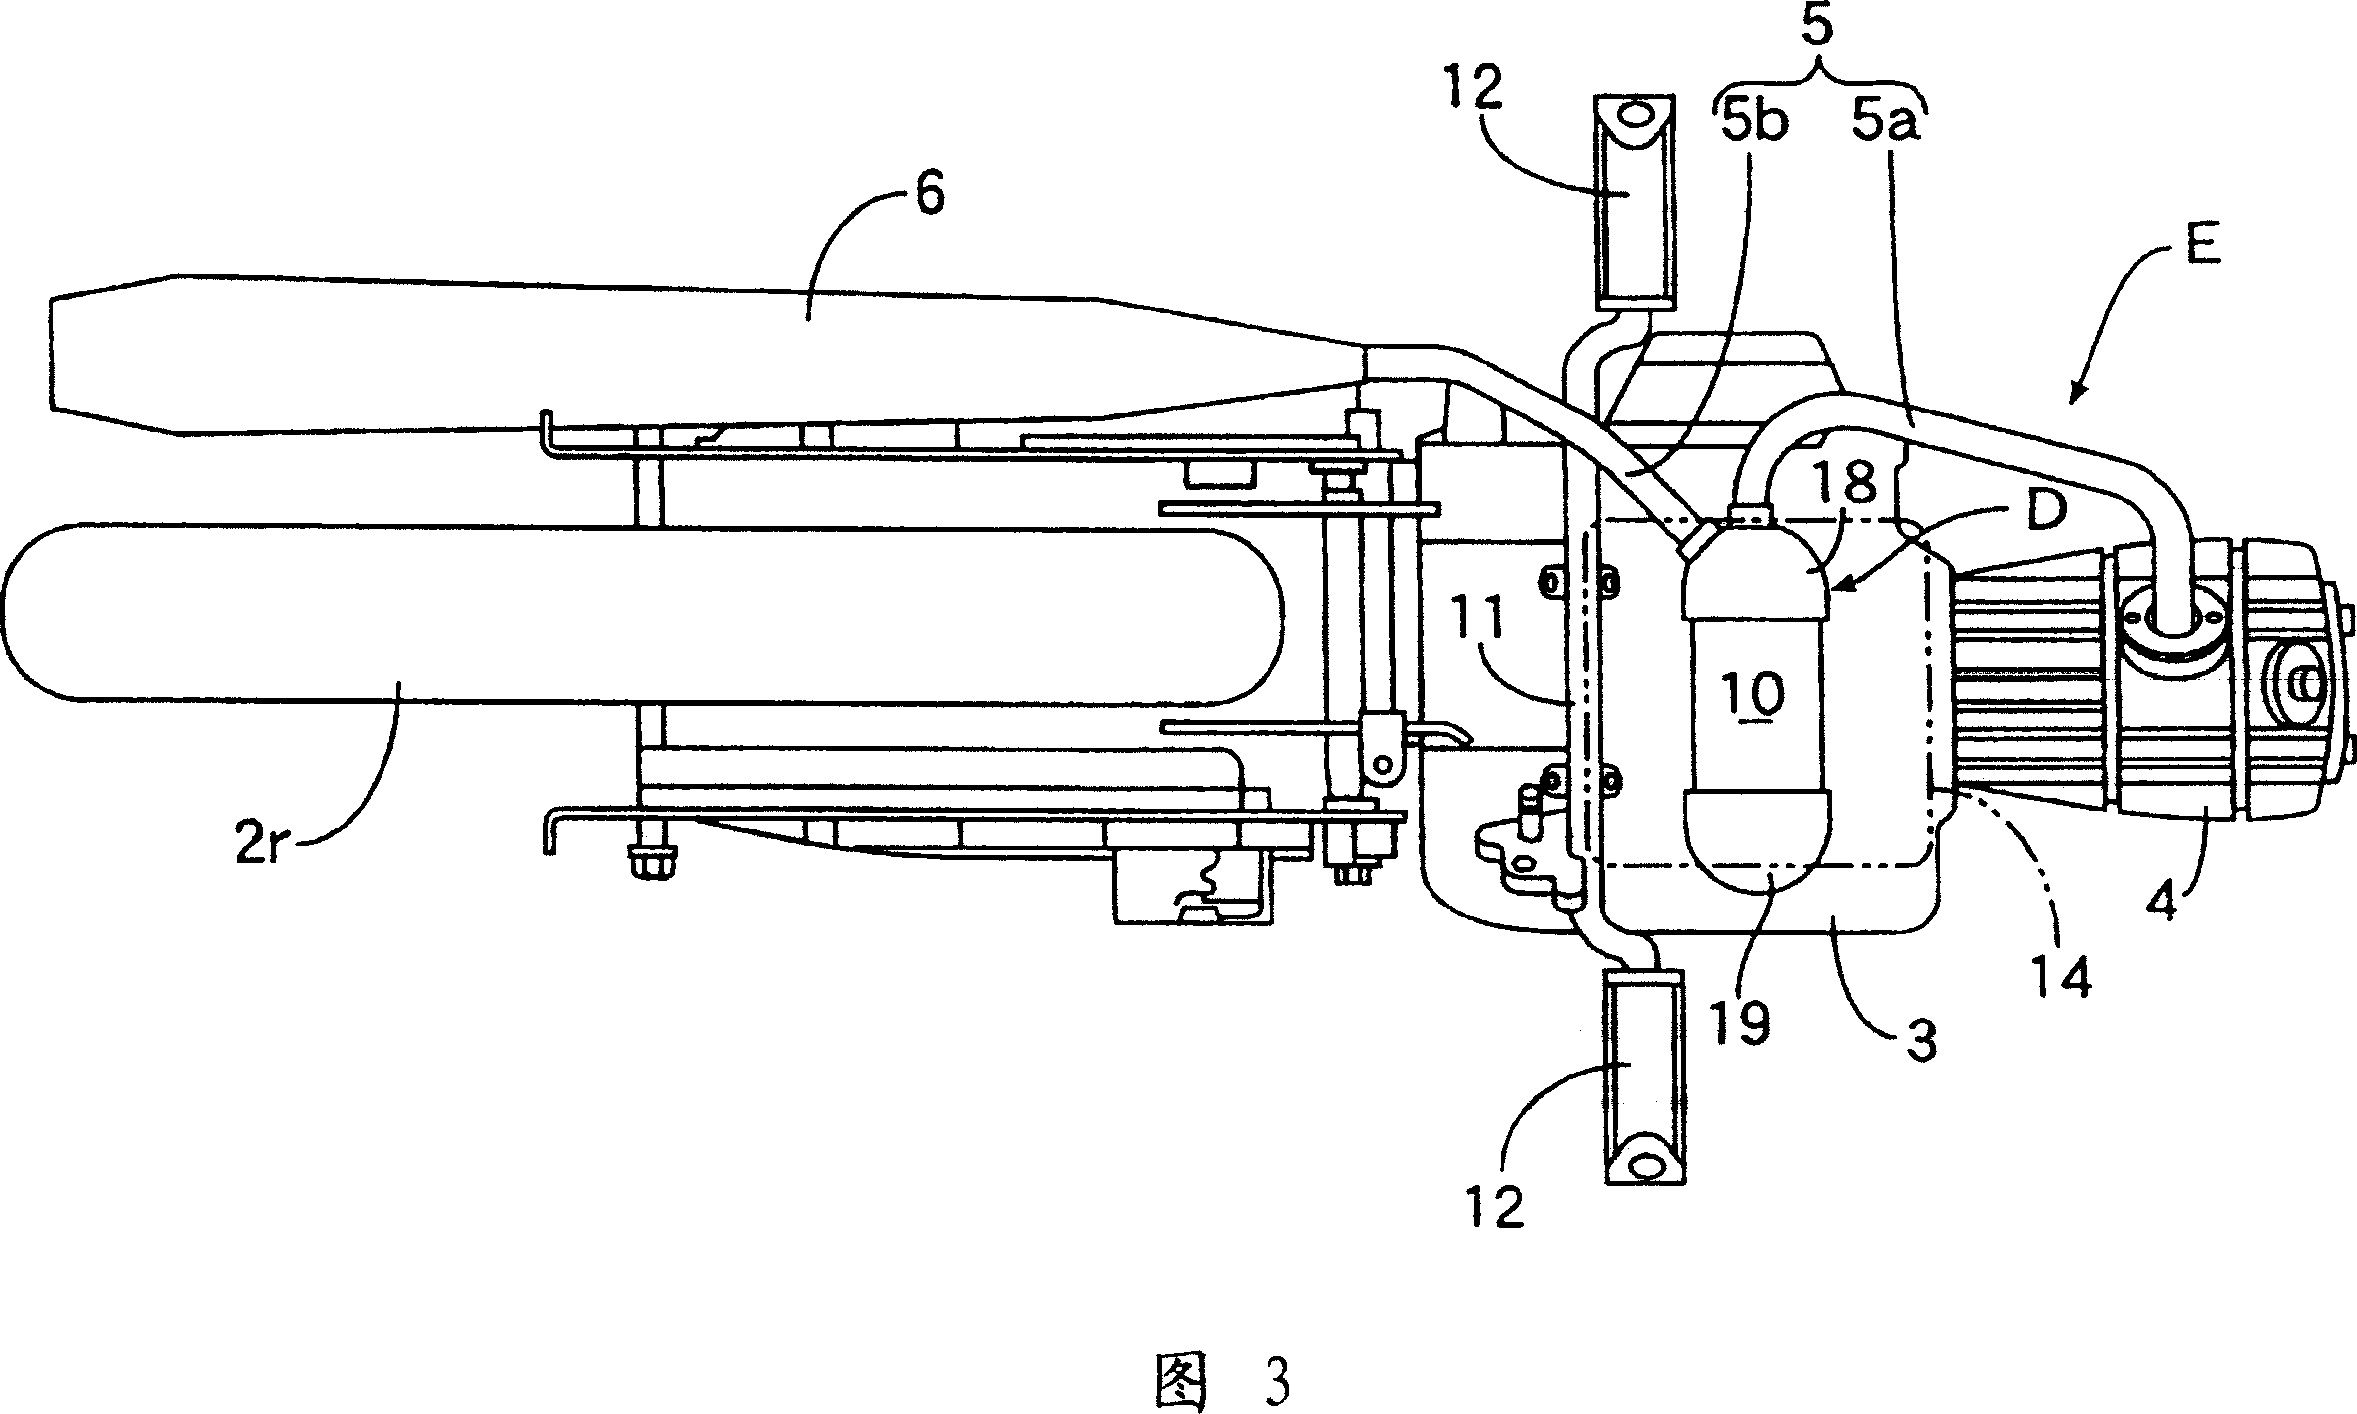 Exhaust purifying device for motor